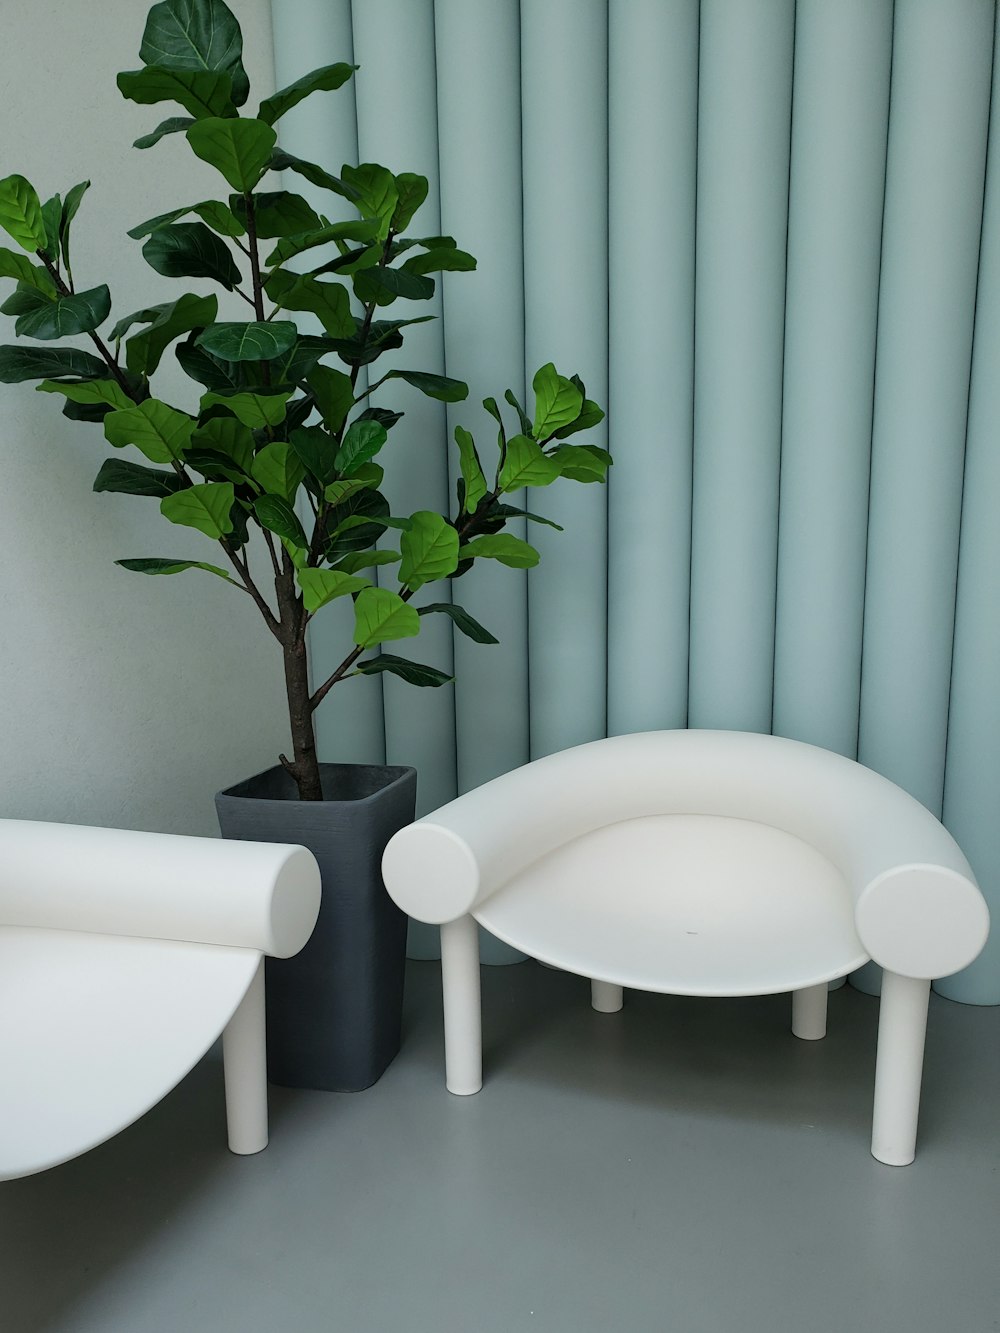 a plant in a black pot next to a white chair